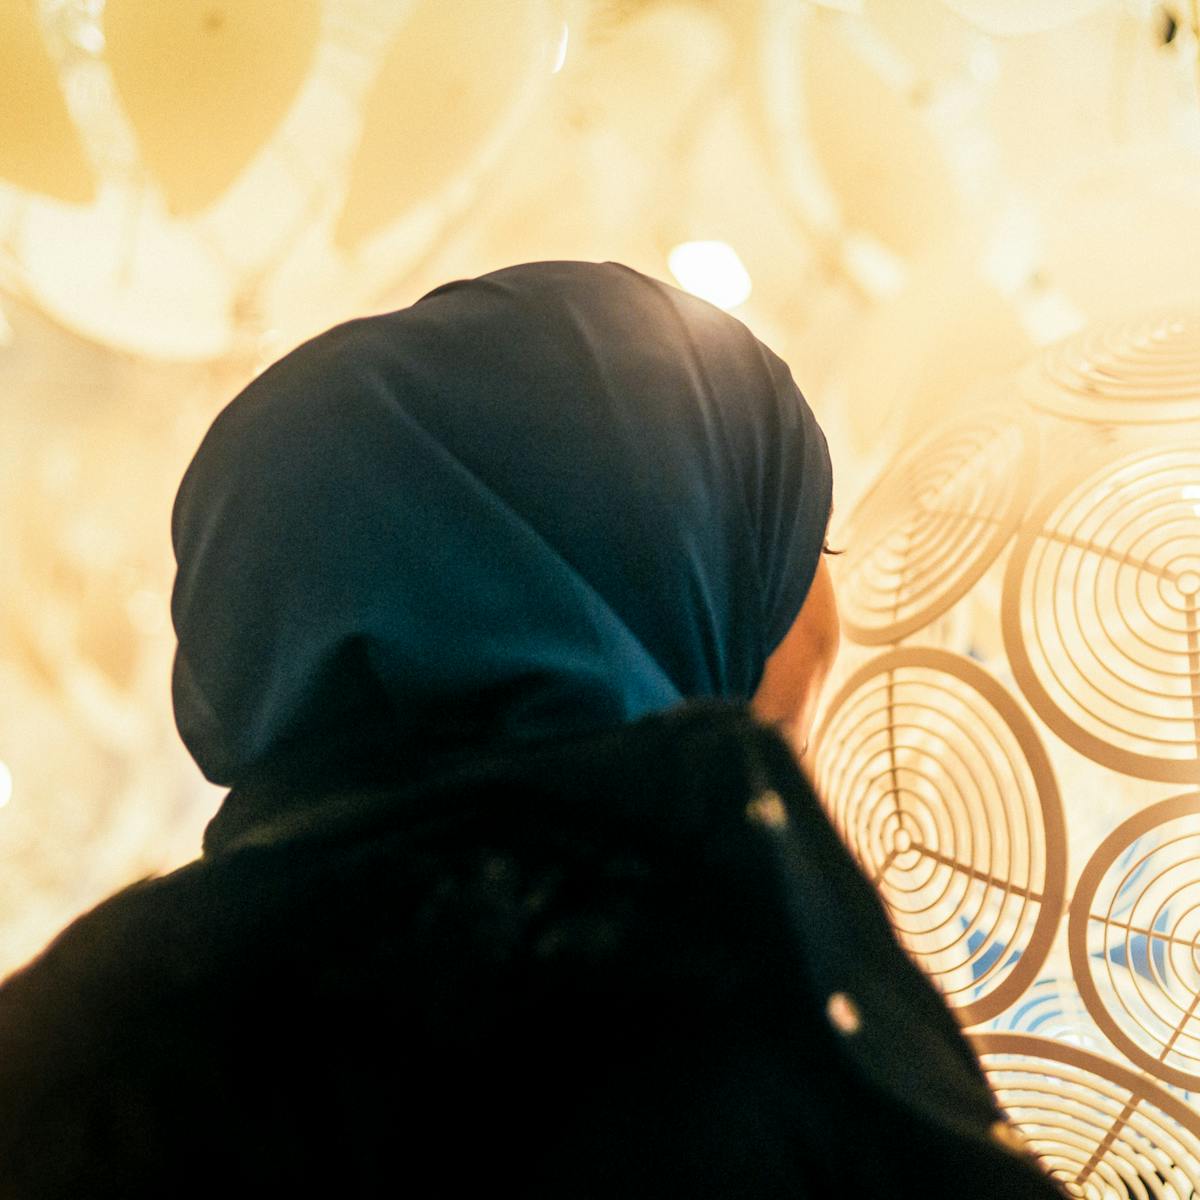 Photograph of a woman wearing a blue head scarf facing away from the camera. The viewpoint is low down looking up at her. In the background is the warm yellow and orange colours of patterned lamp shades in a shop display.